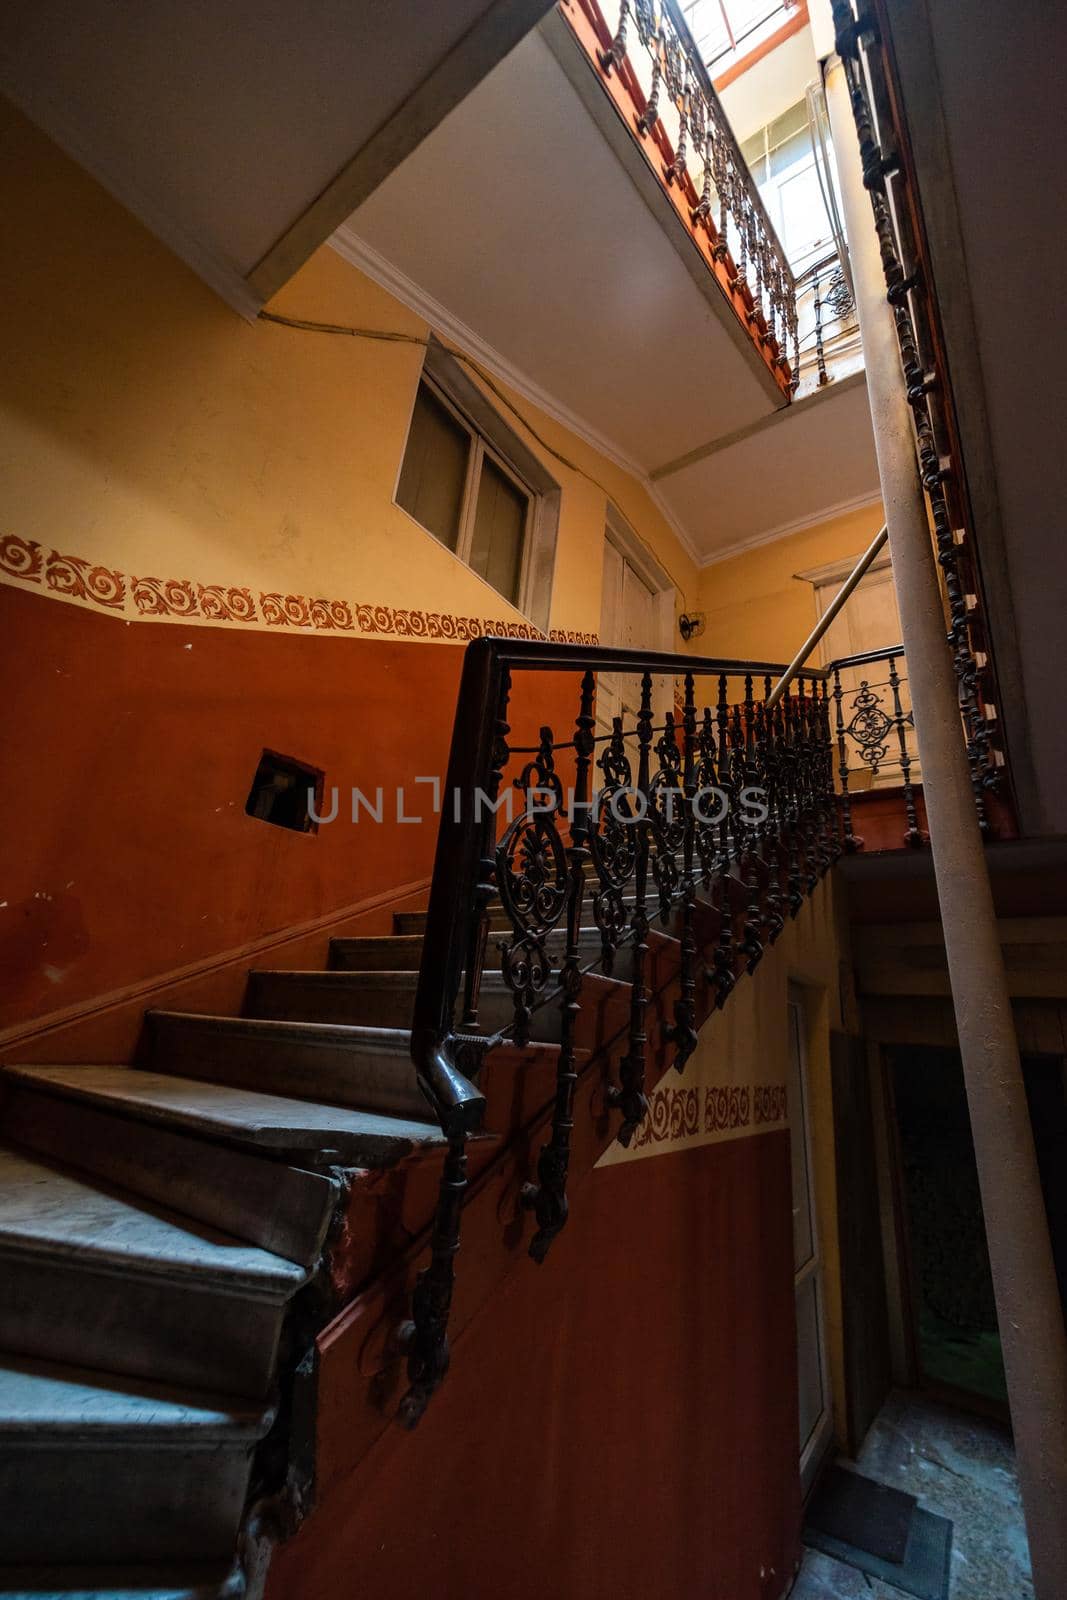 Old Tbilisi's maison stairways by Elet